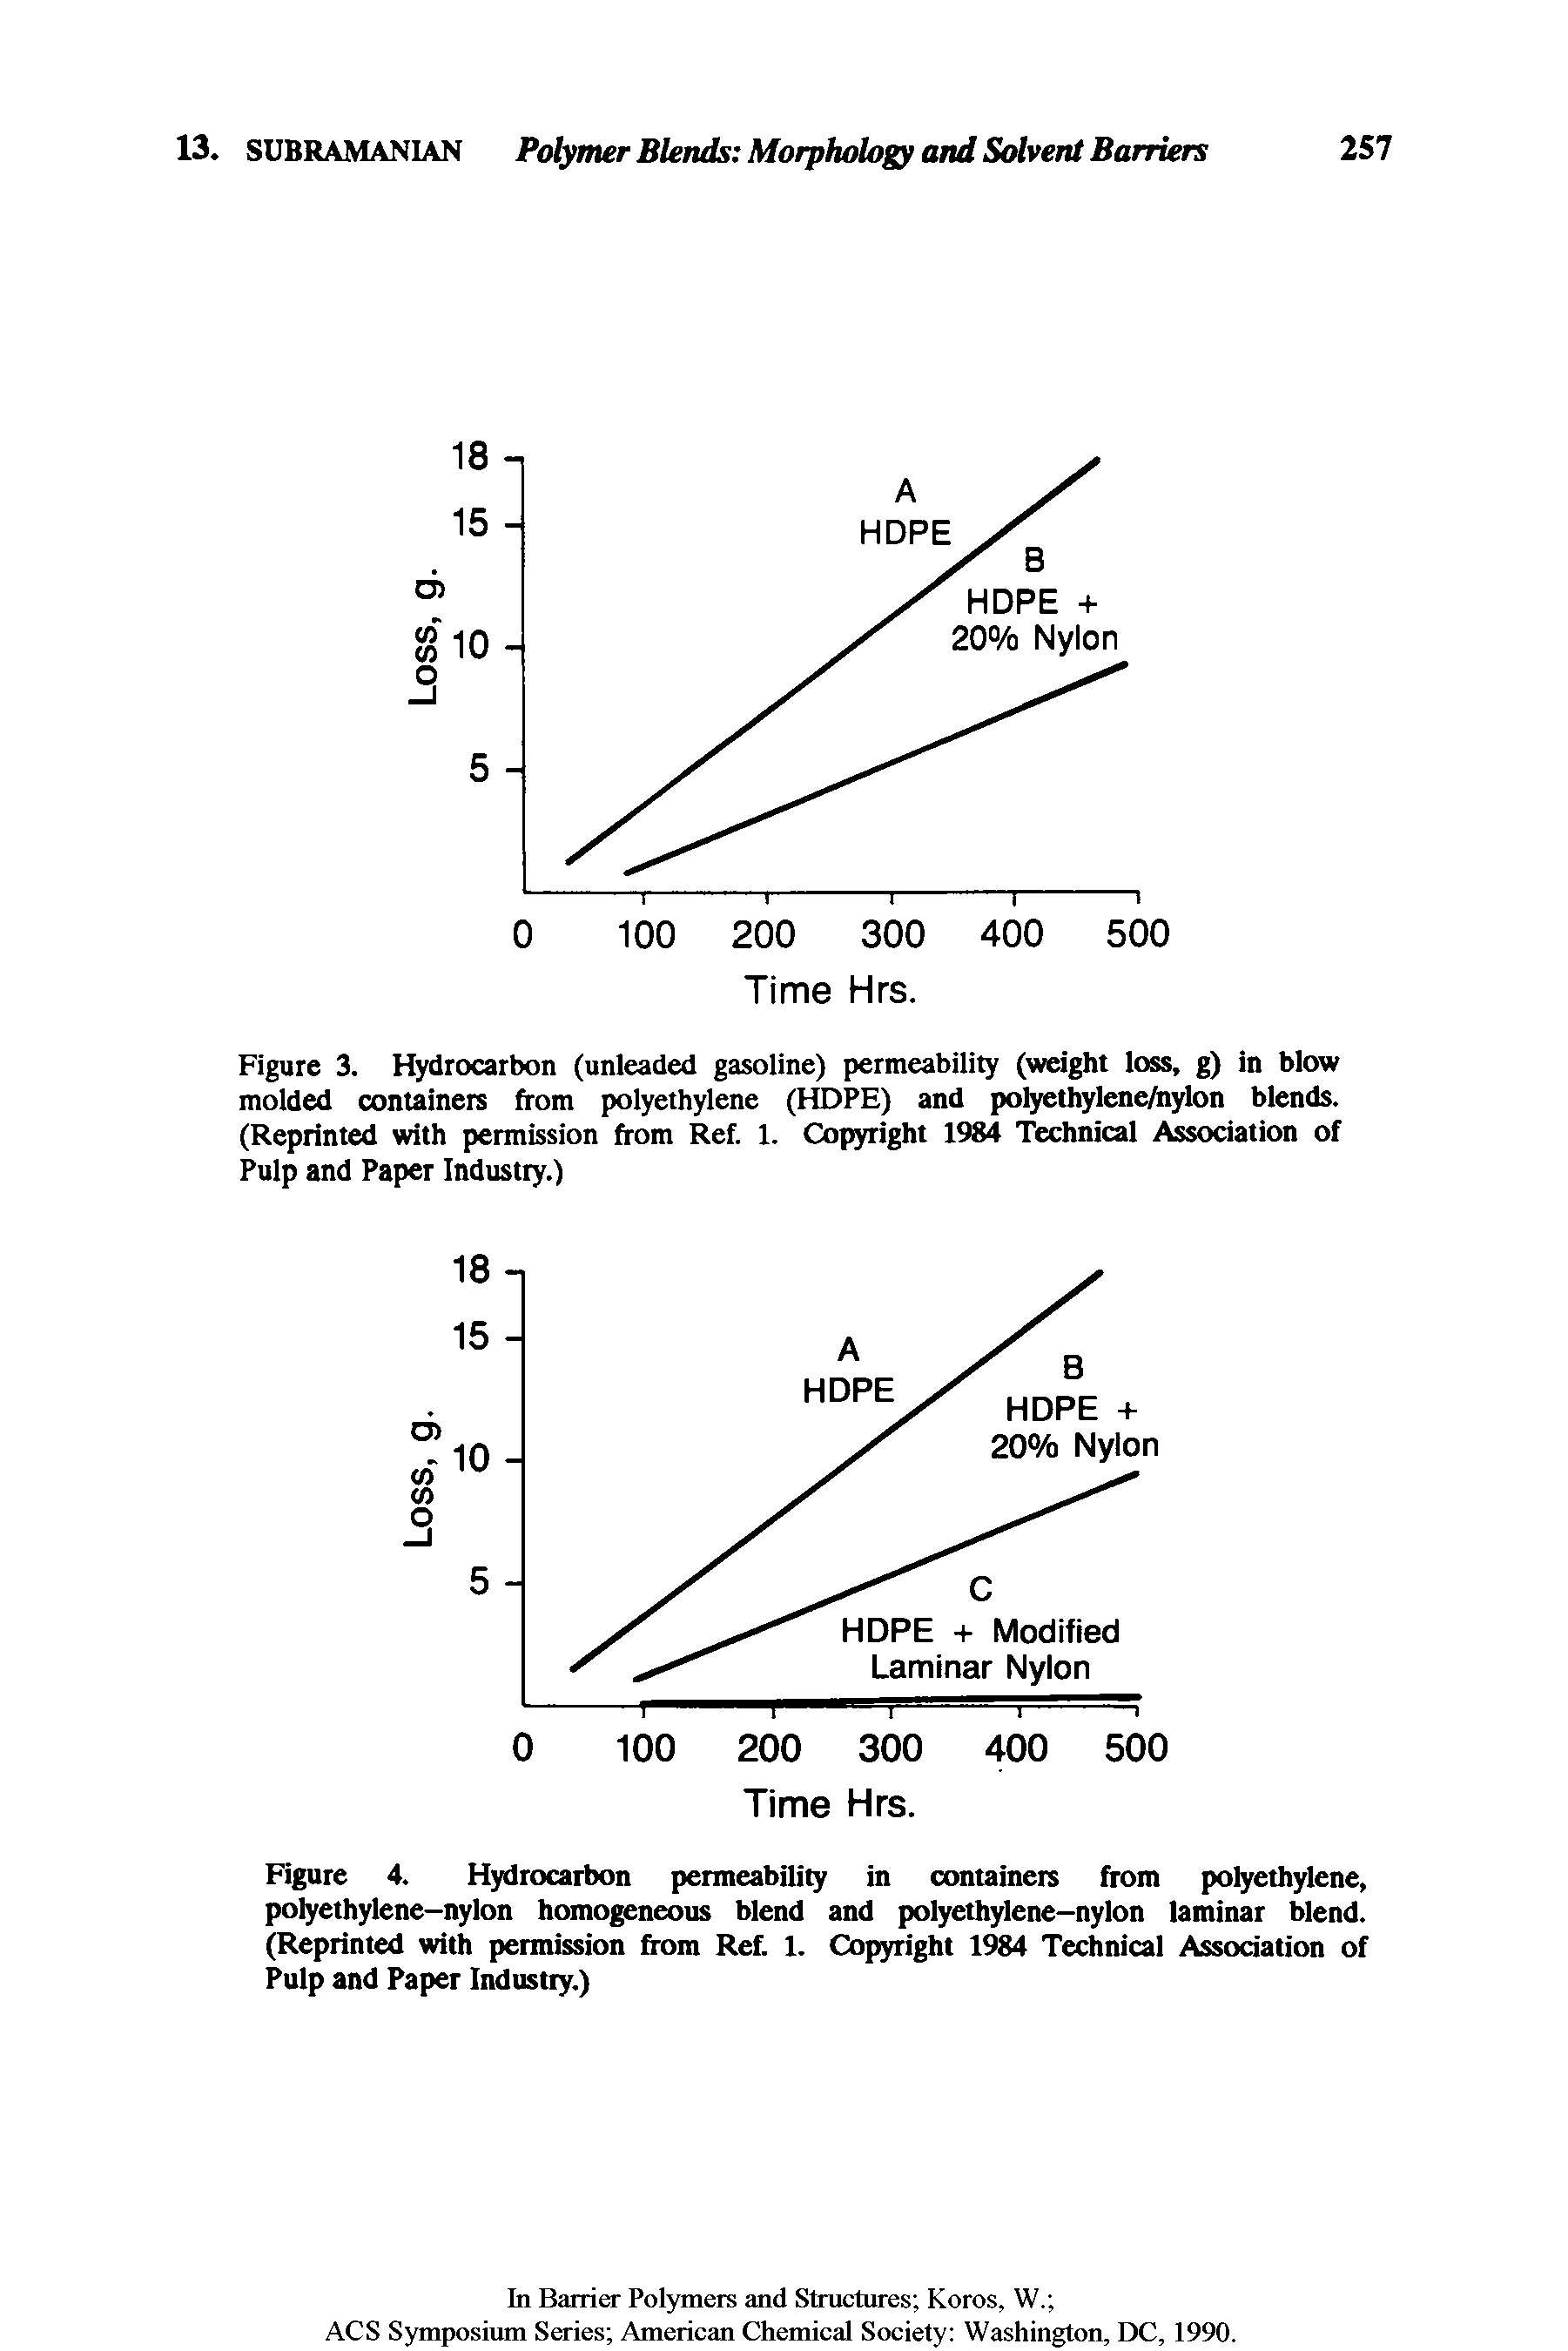 Figure 4. Hydrocarbon permeability in containers from polyethylene, polyethylene—nylon homogeneous blend and polyethylene—nylon laminar blend. (Reprinted with permission from Ref. 1. Copyright 1984 Technical Association of Pulp and Paper Industry.)...